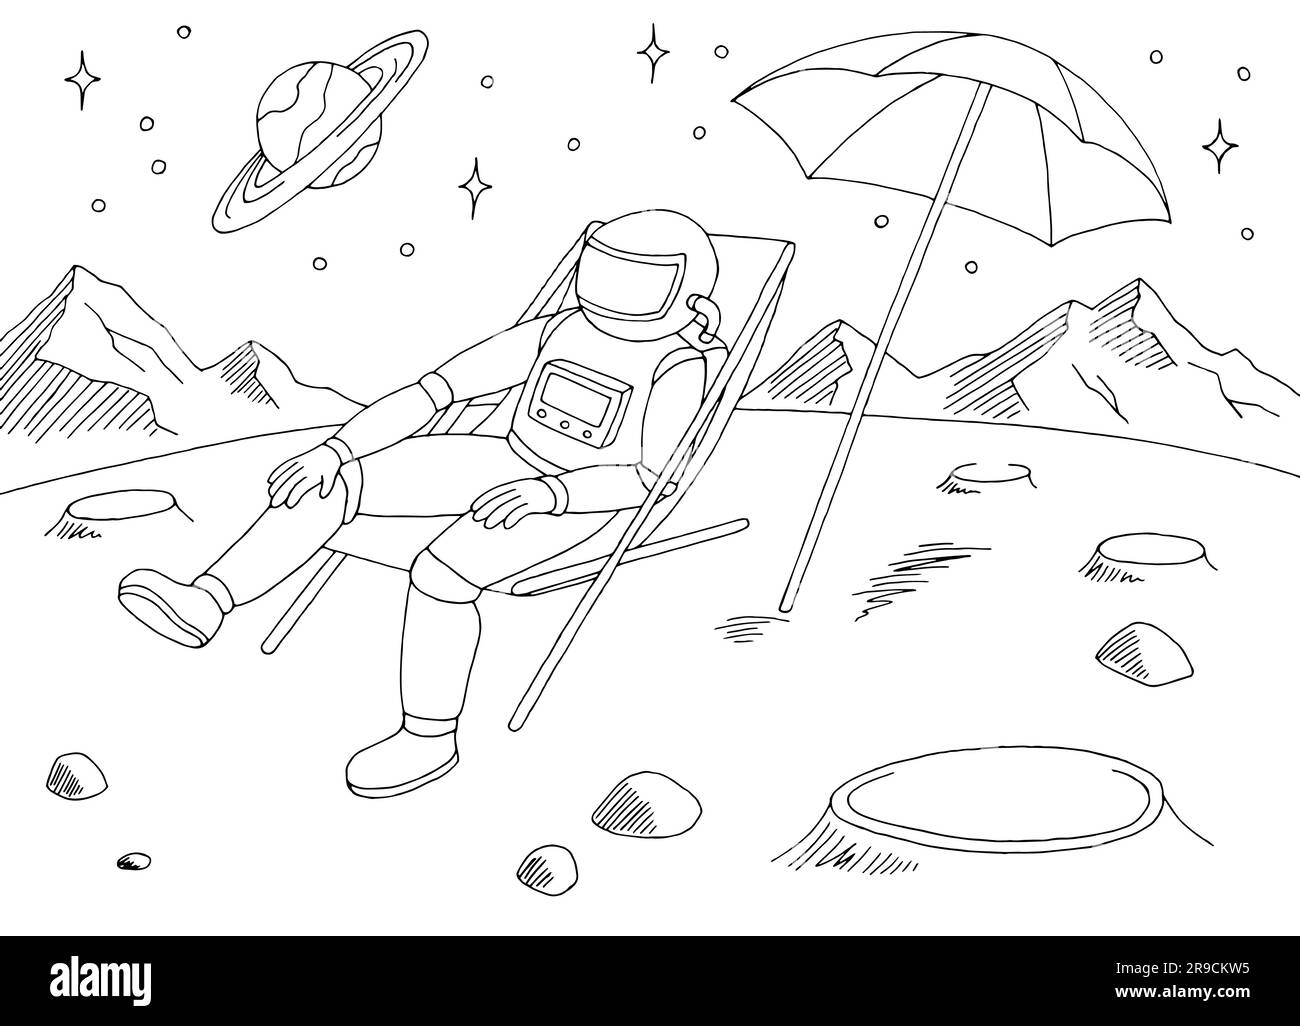 Astronaut is sitting in a sun lounger alien planet graphic black white space landscape sketch illustration vector Stock Vector